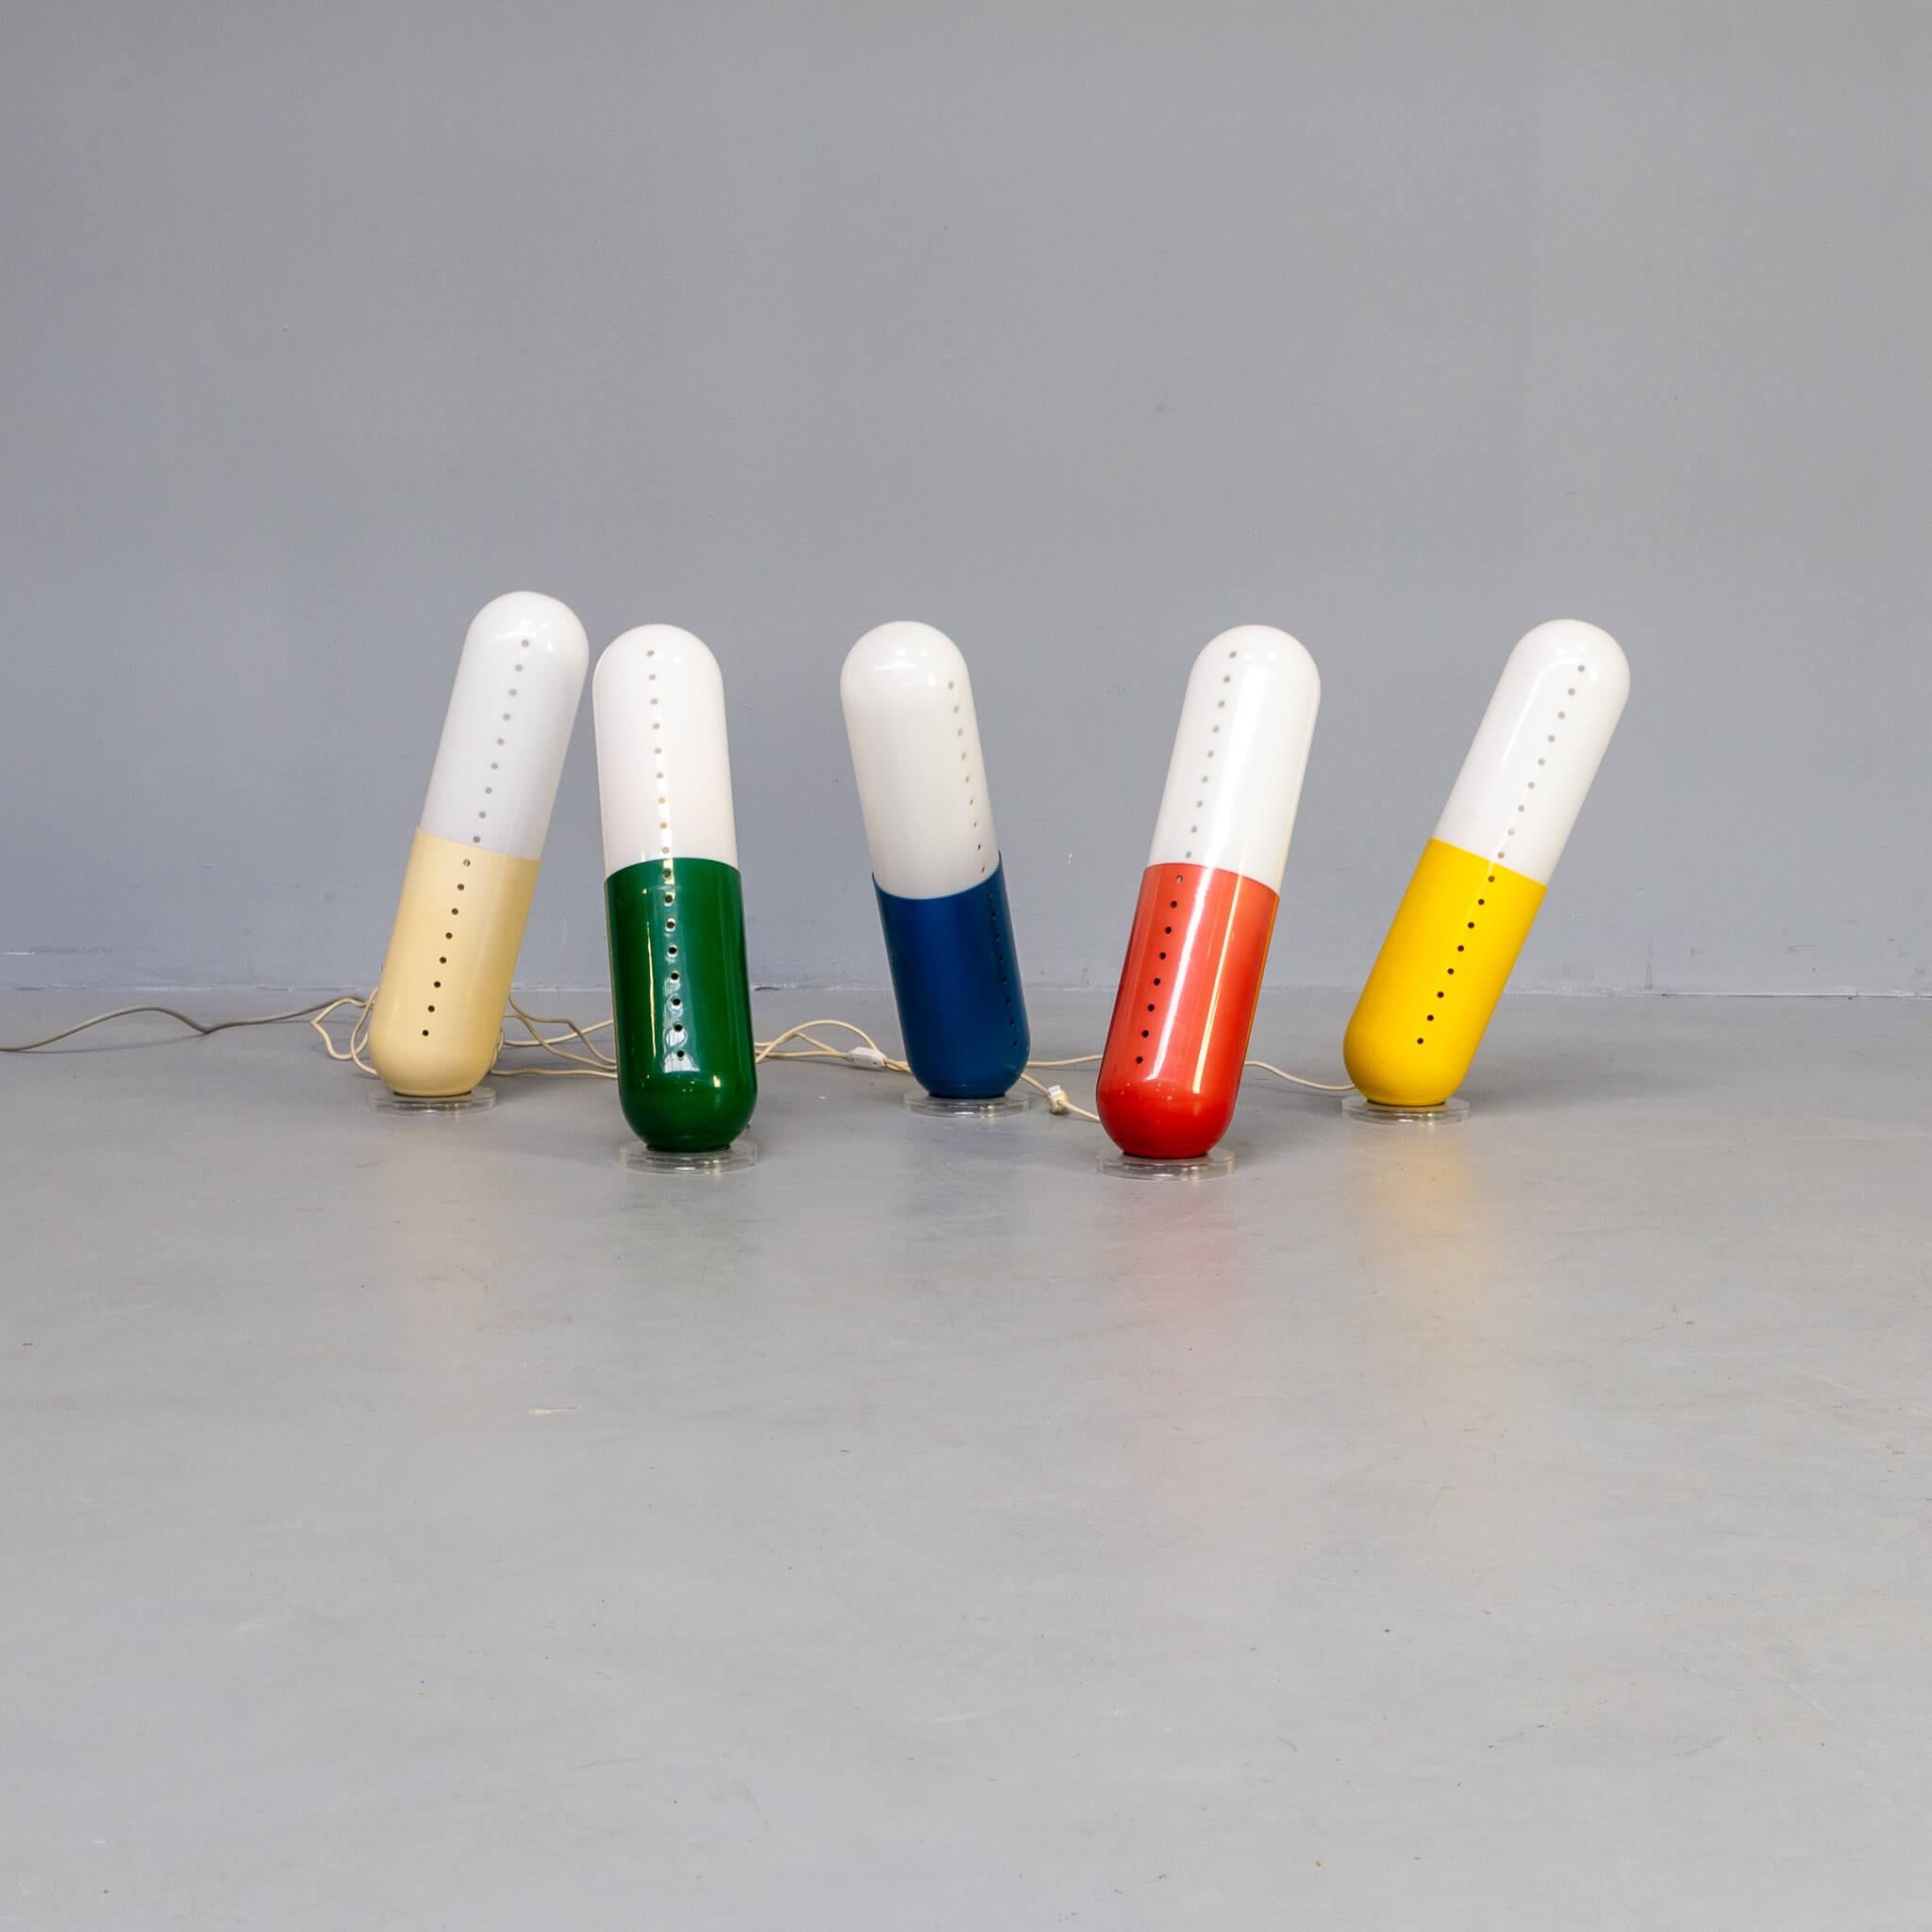 Pillola lamps, a set of five lamps in blue, white , green ,red and yellow ABS plastic and acrylic. The lamps are turnable in many directions because the are carried on a translucent ring with rubber ring in it. Designed by Cesare Casati and Emanuele